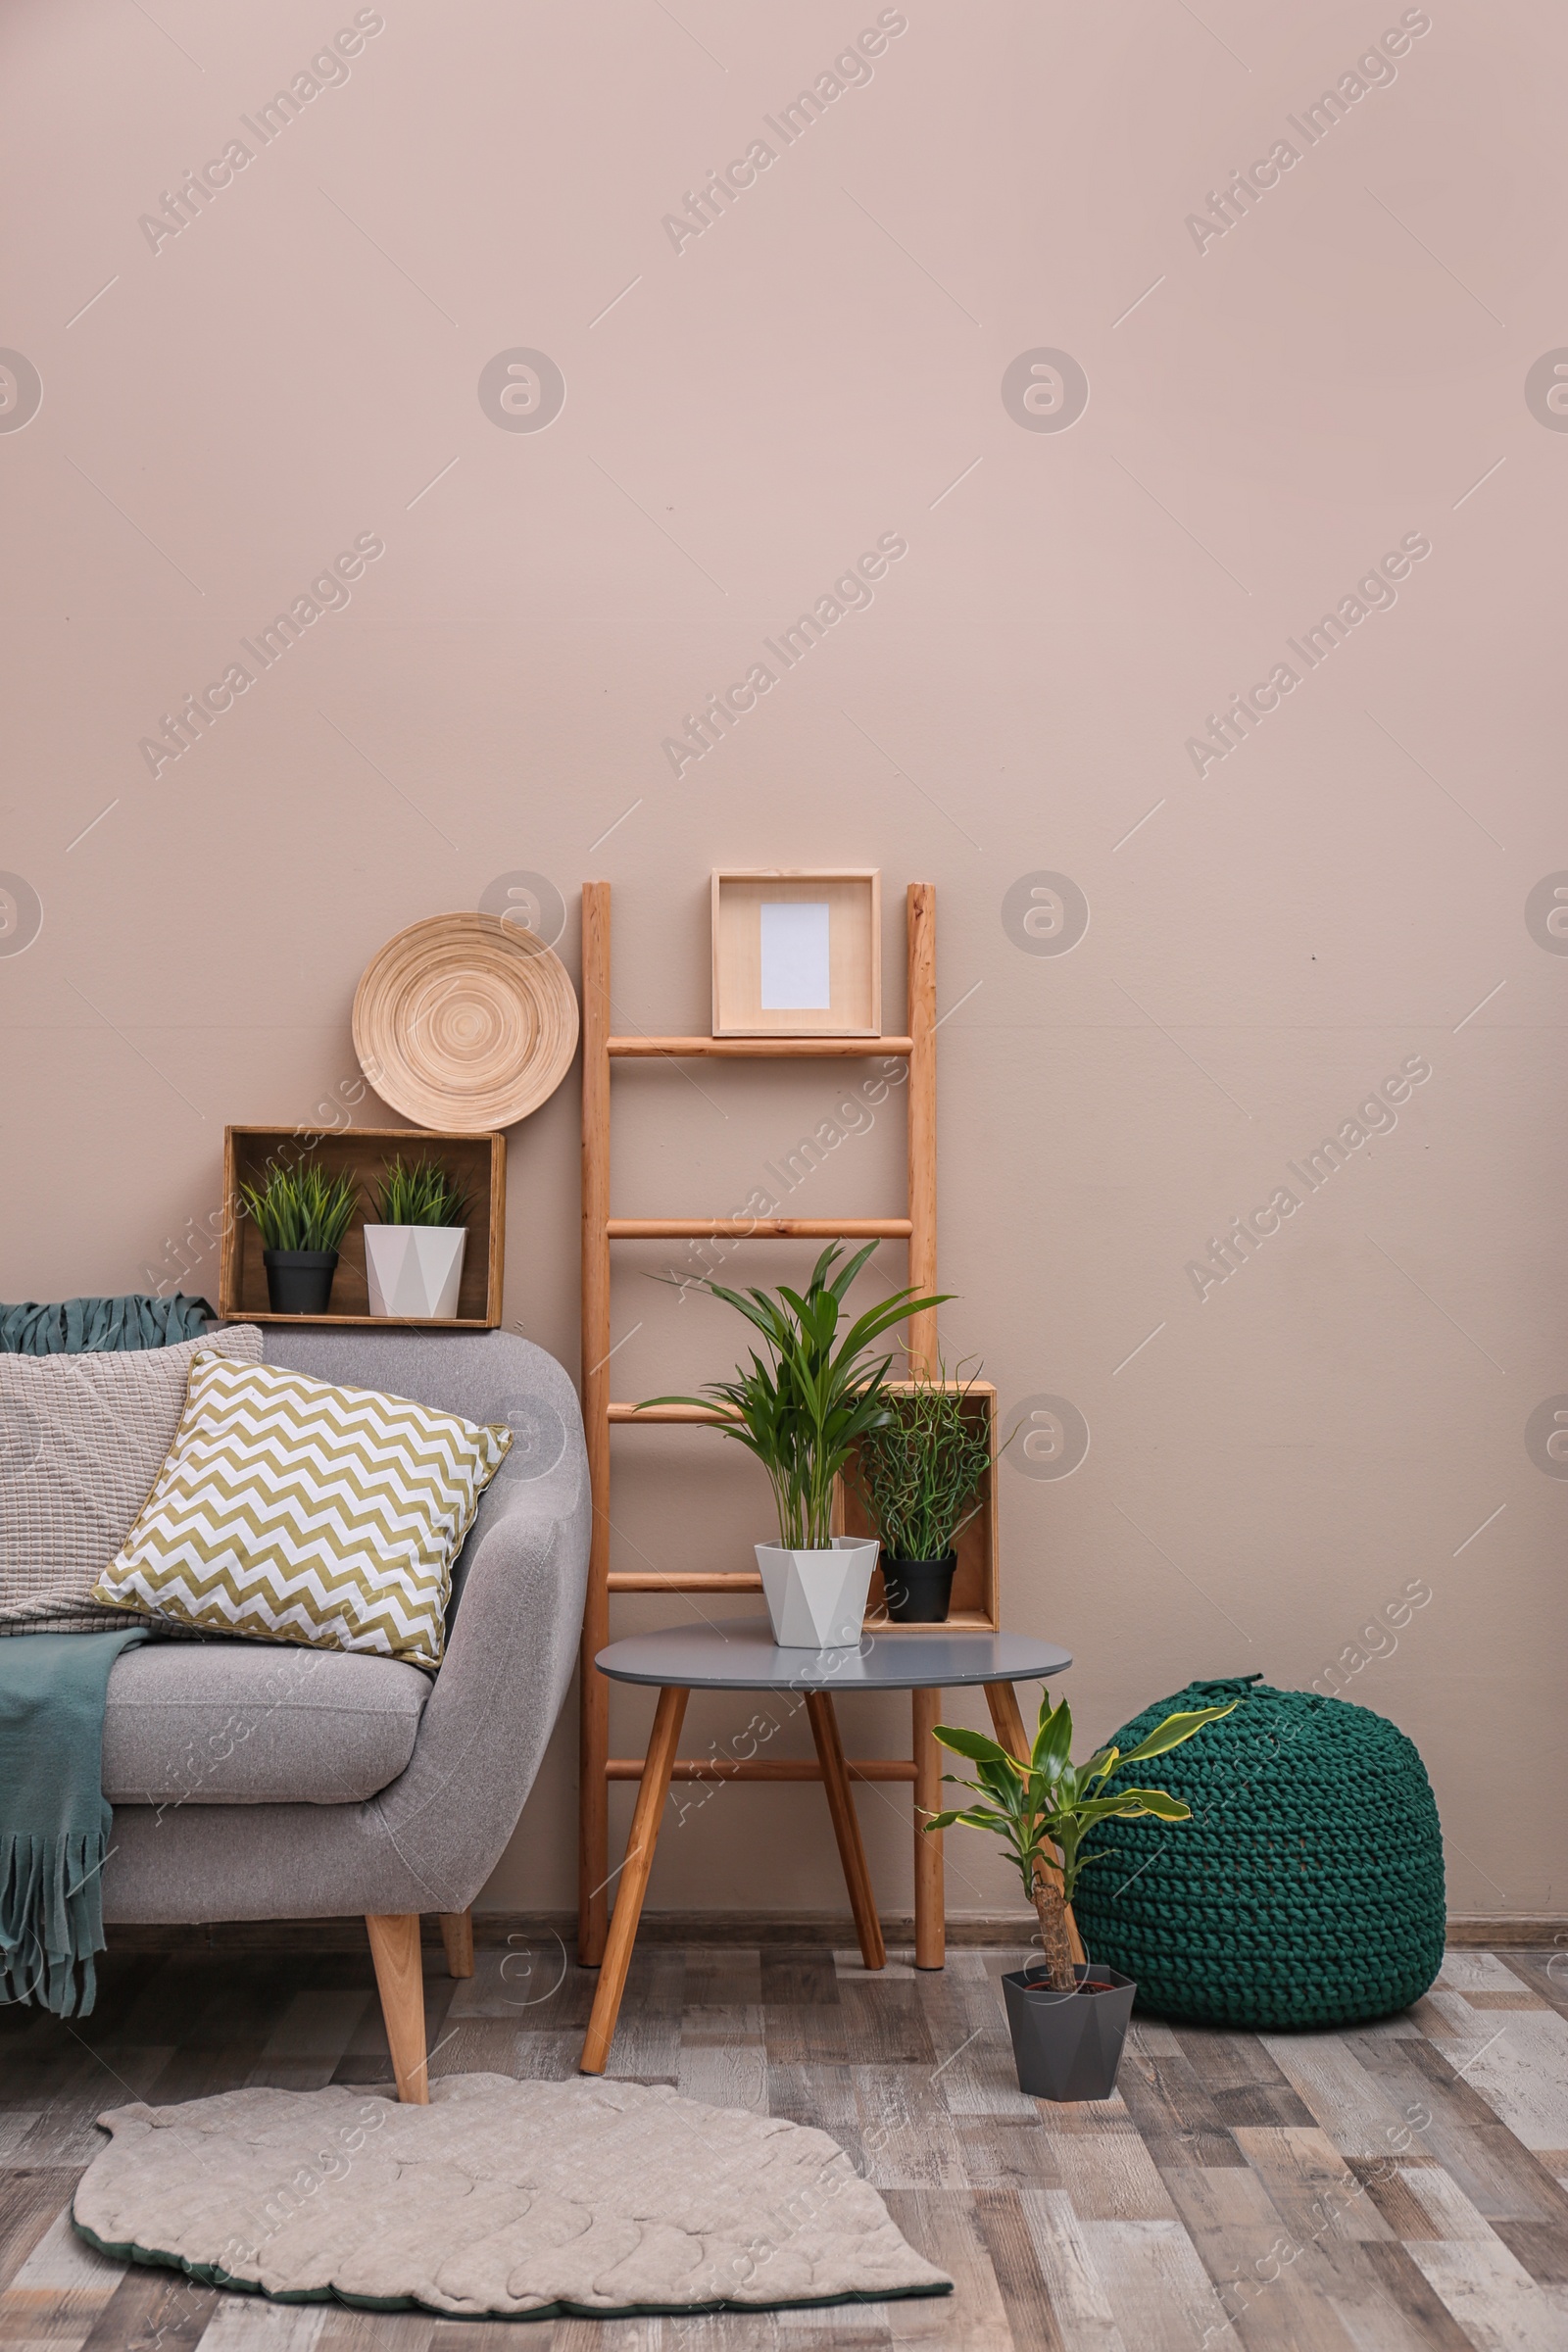 Photo of Modern eco style interior of living room with wooden crates and sofa near color wall